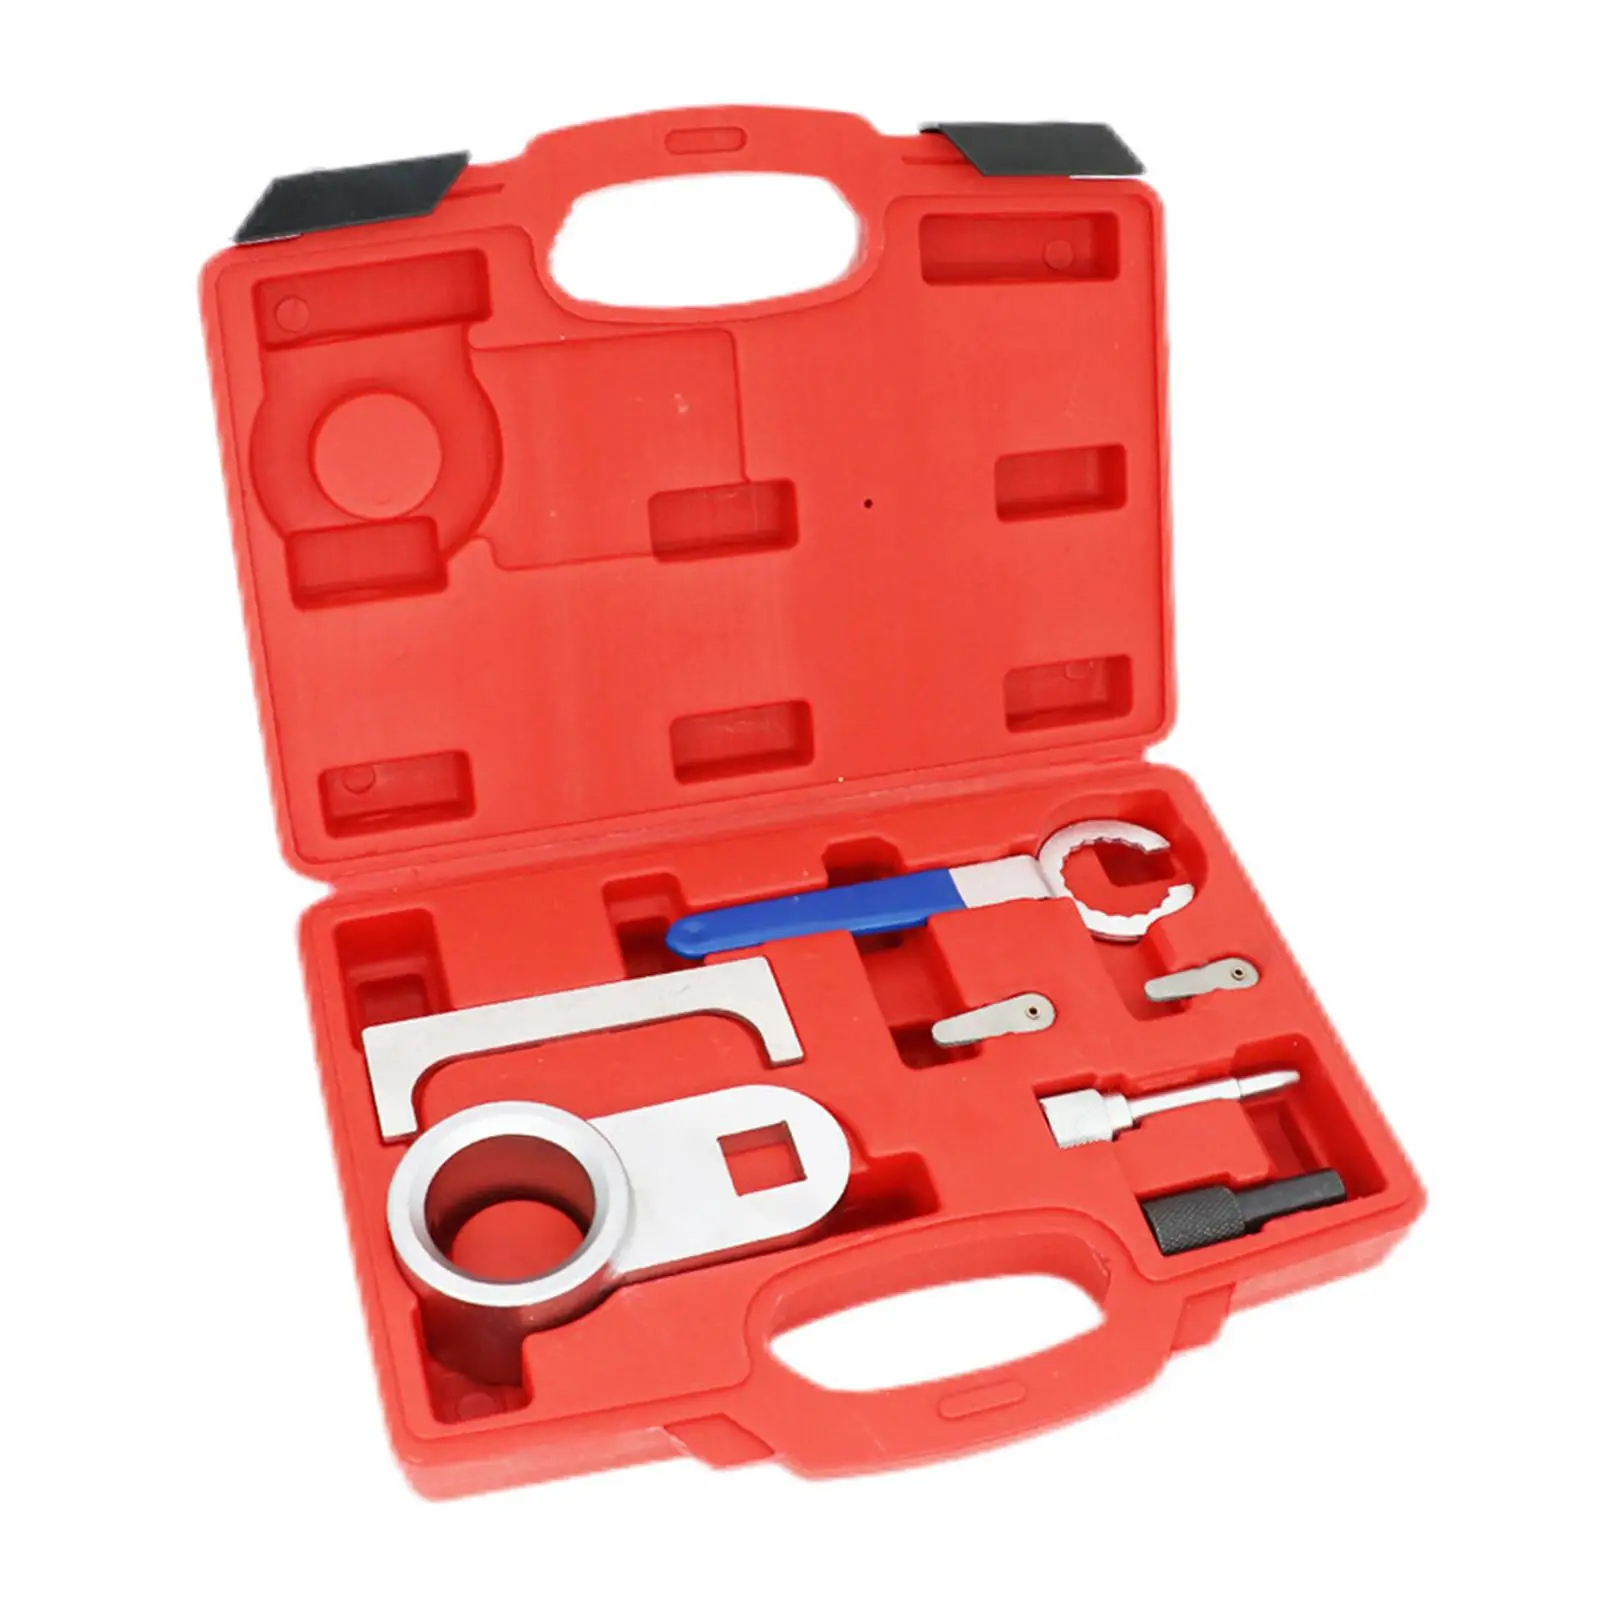 Engine Timing Tool Camshaft Alignment Tool Kits Heavy Duty High Performance Replacement Repair Tool Timing Belt Engine Tool